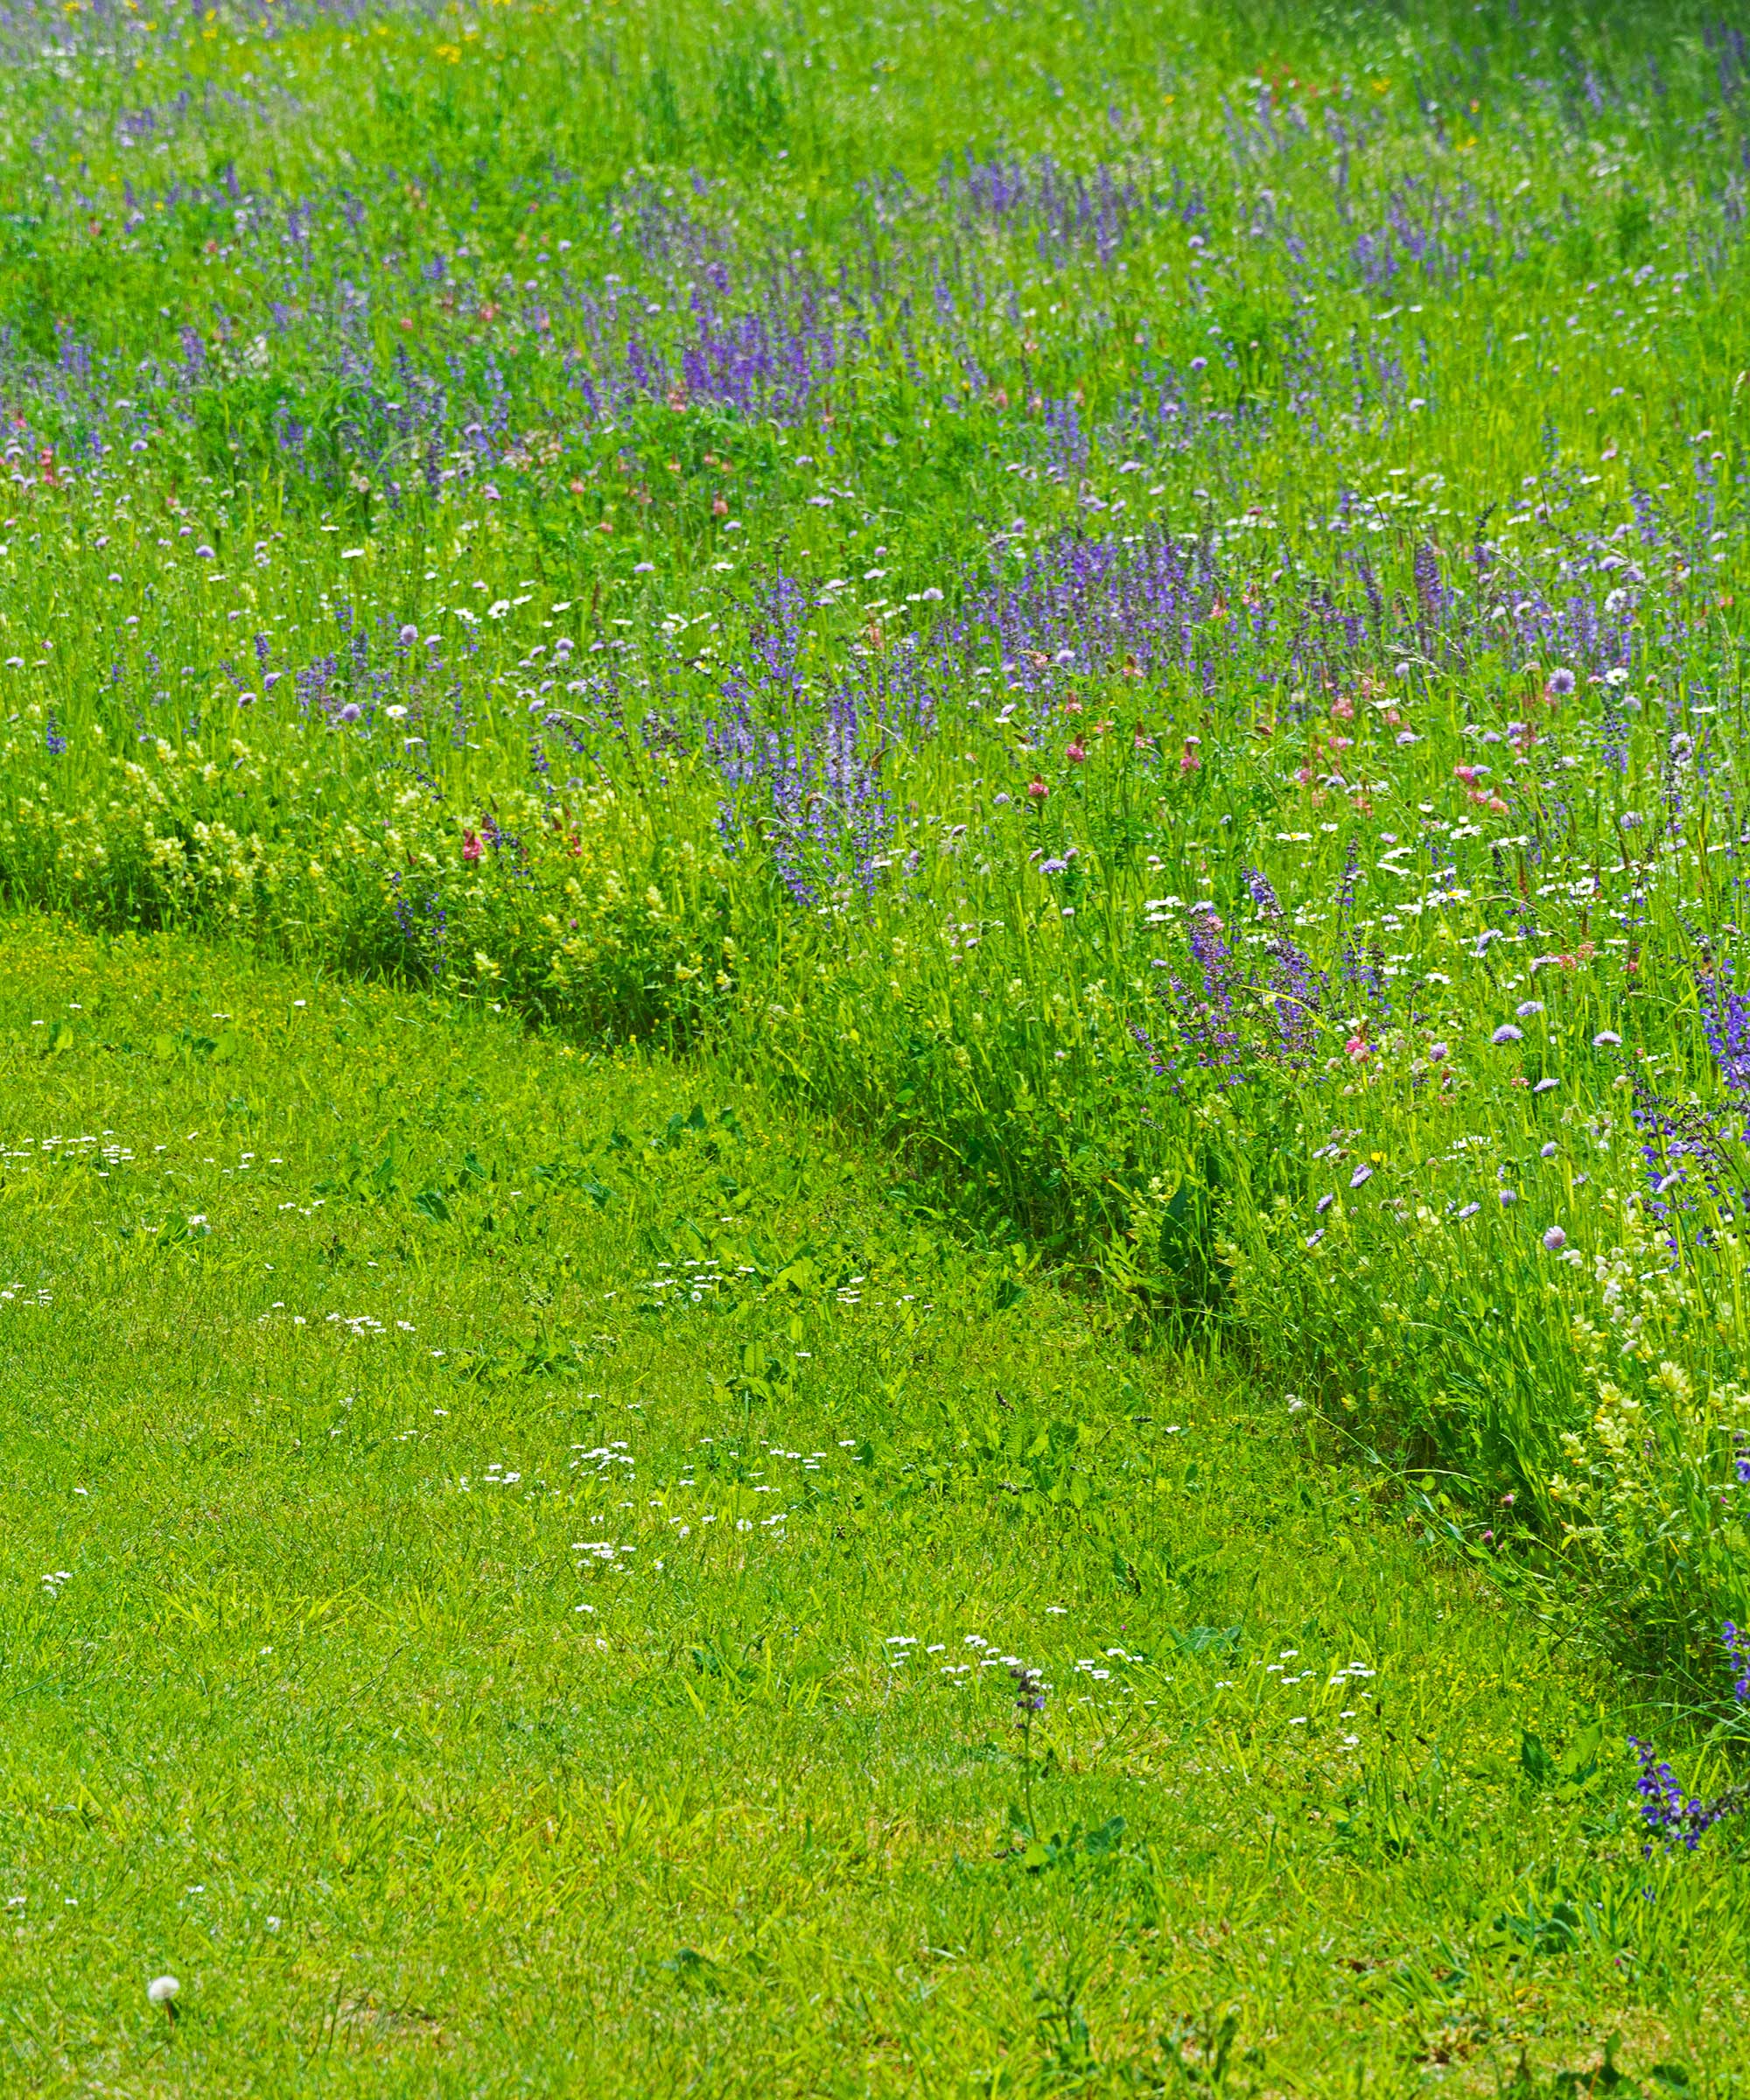 mowed lawn path with wildflowers